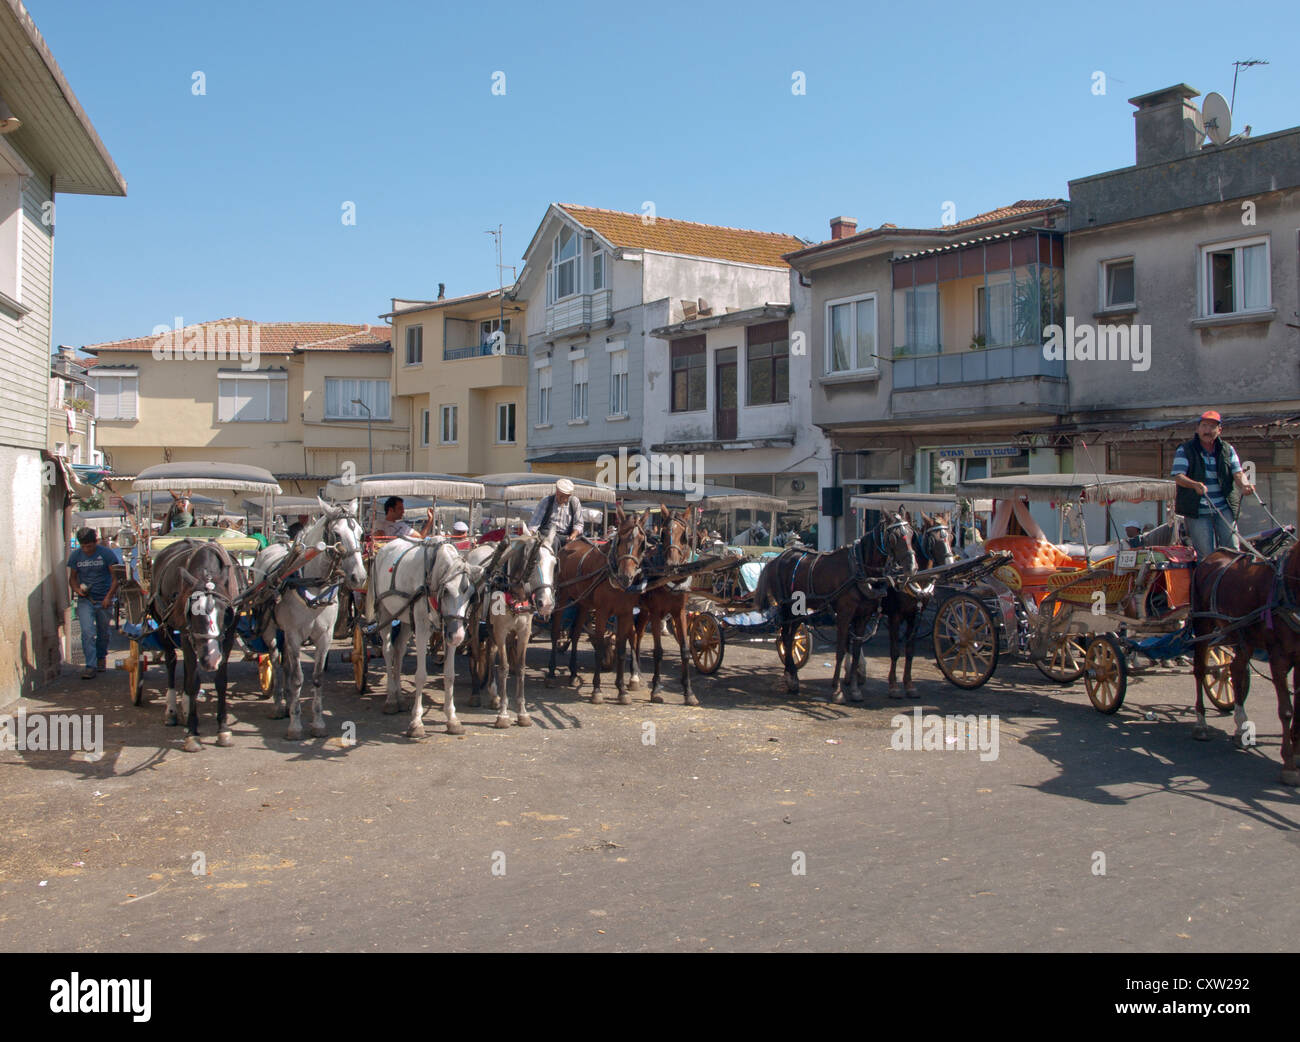 Horse and phaeton carriage is the main public transportation for visitors to Buyukada Turkey. Main taxi stop in the morning. Stock Photo